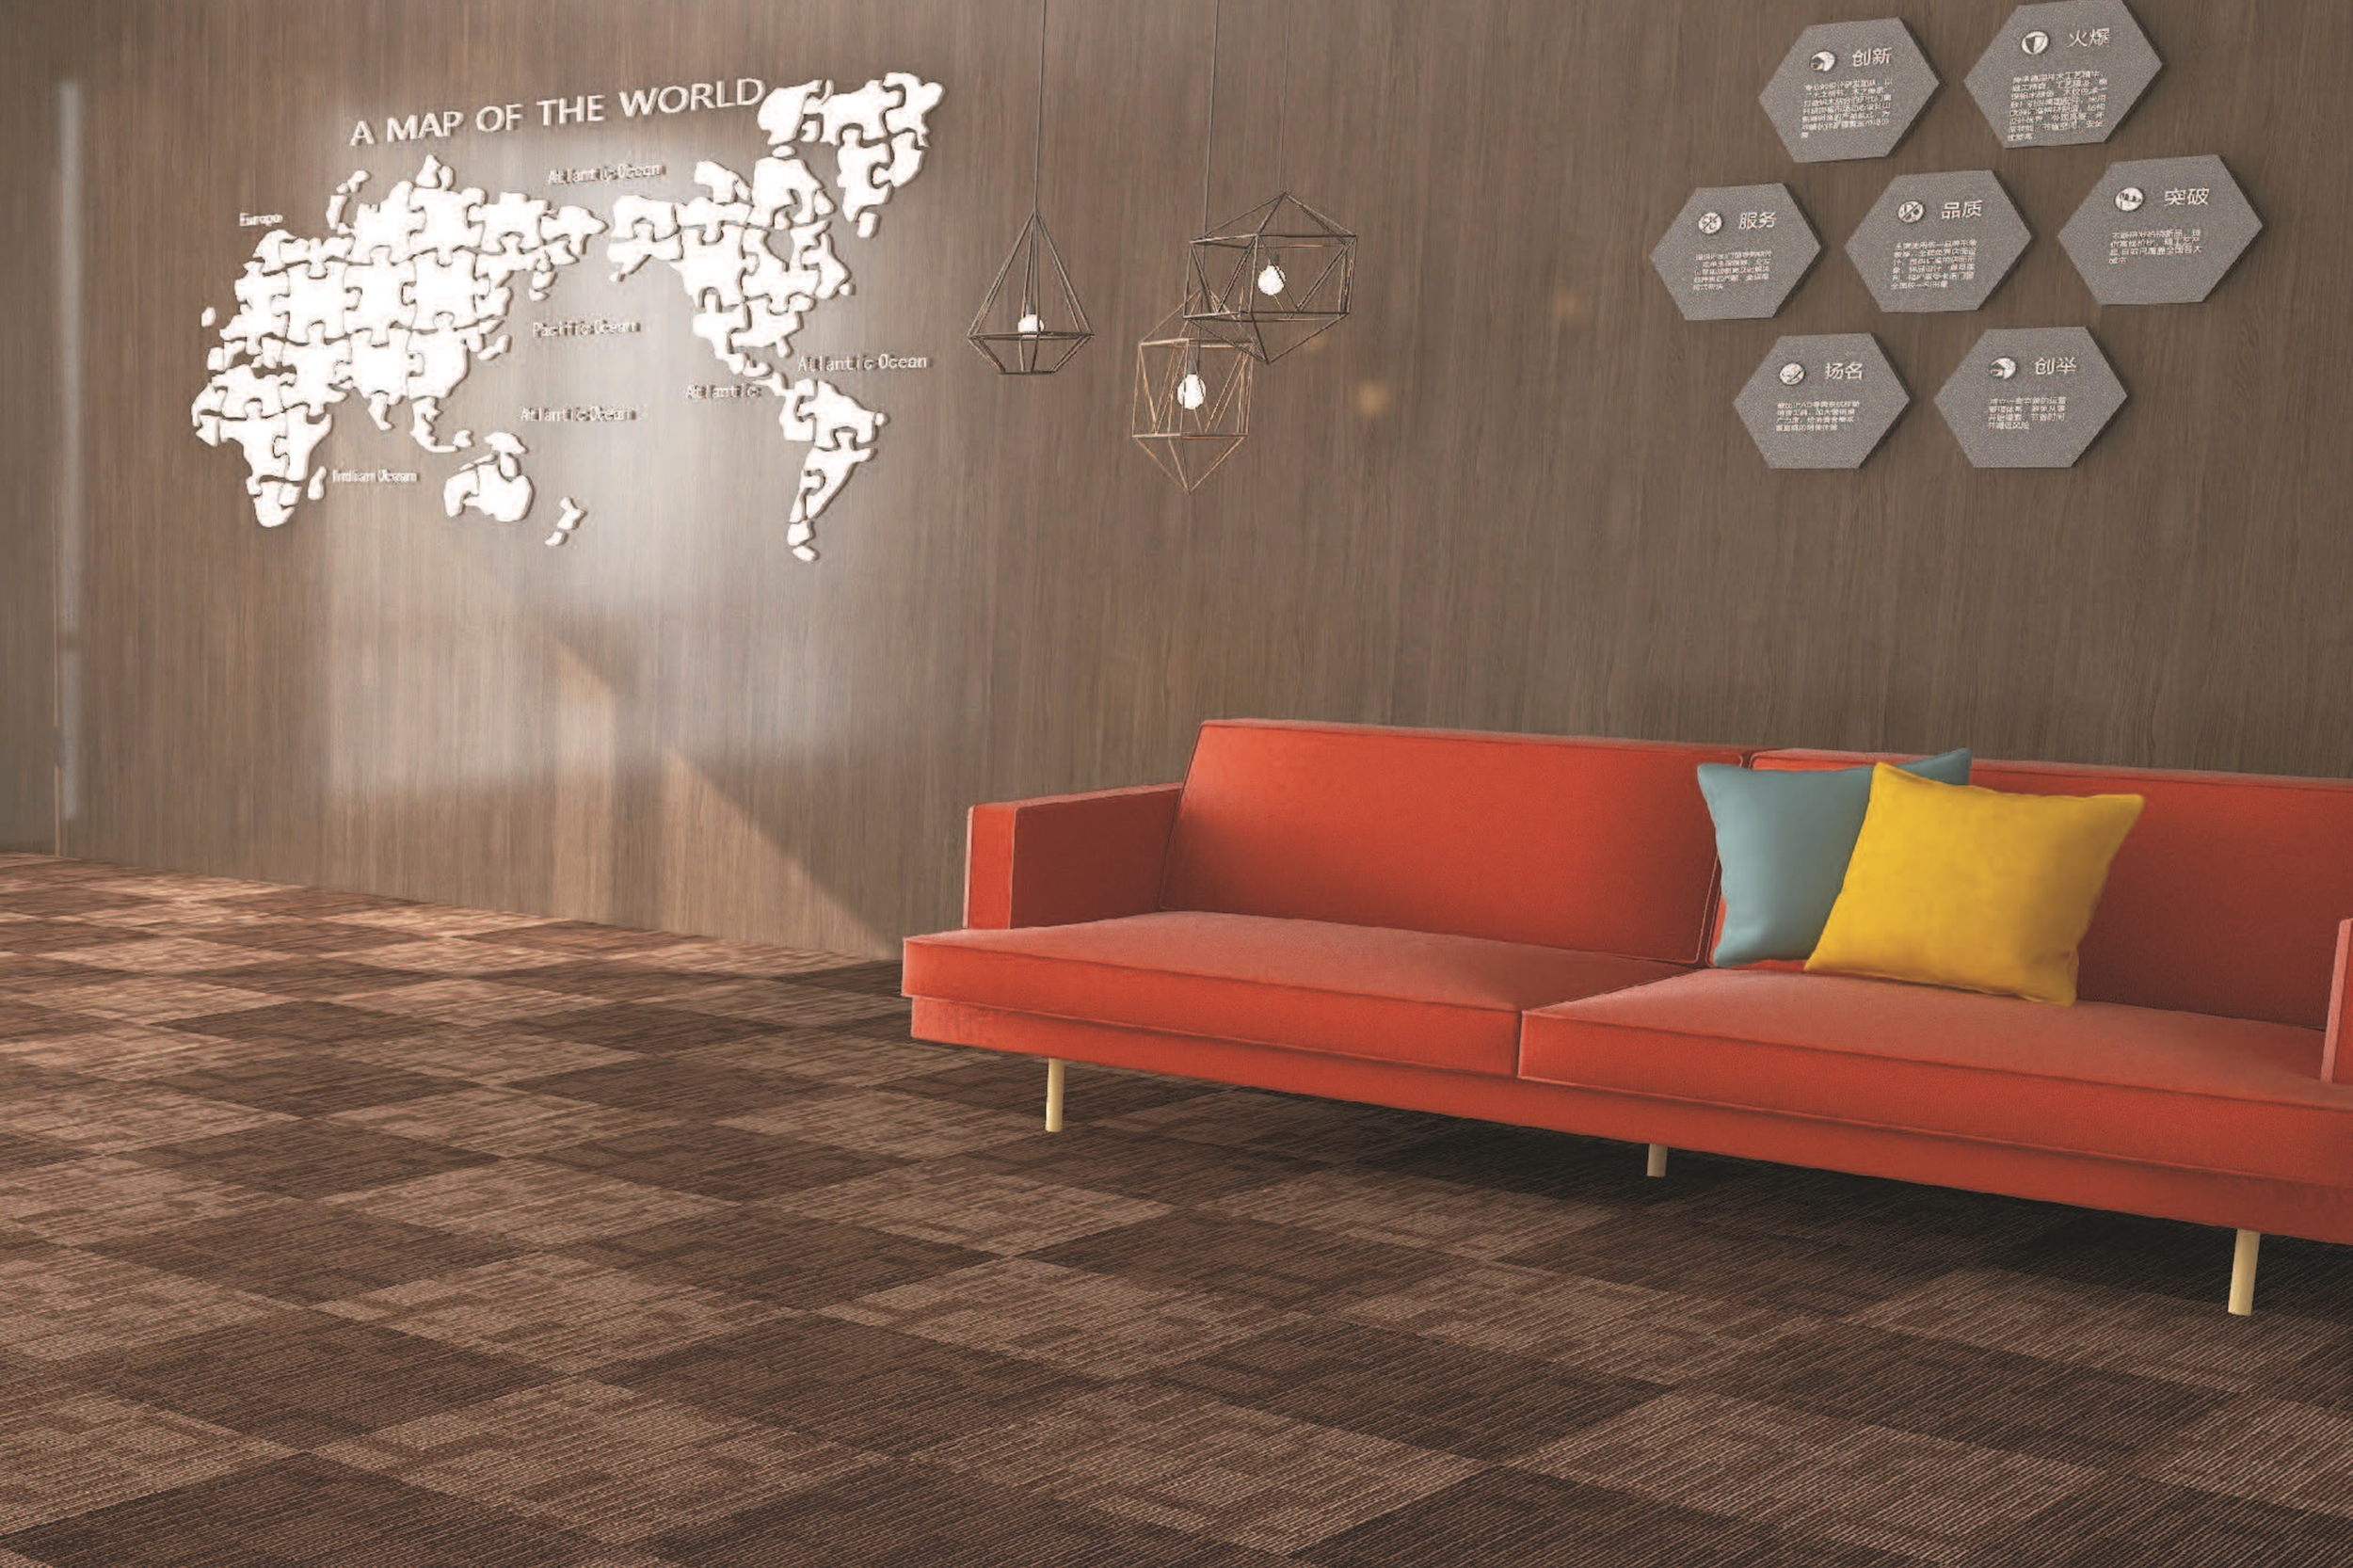 Carpet tile solutions for offices, commercial, and public spaces in Singapore.